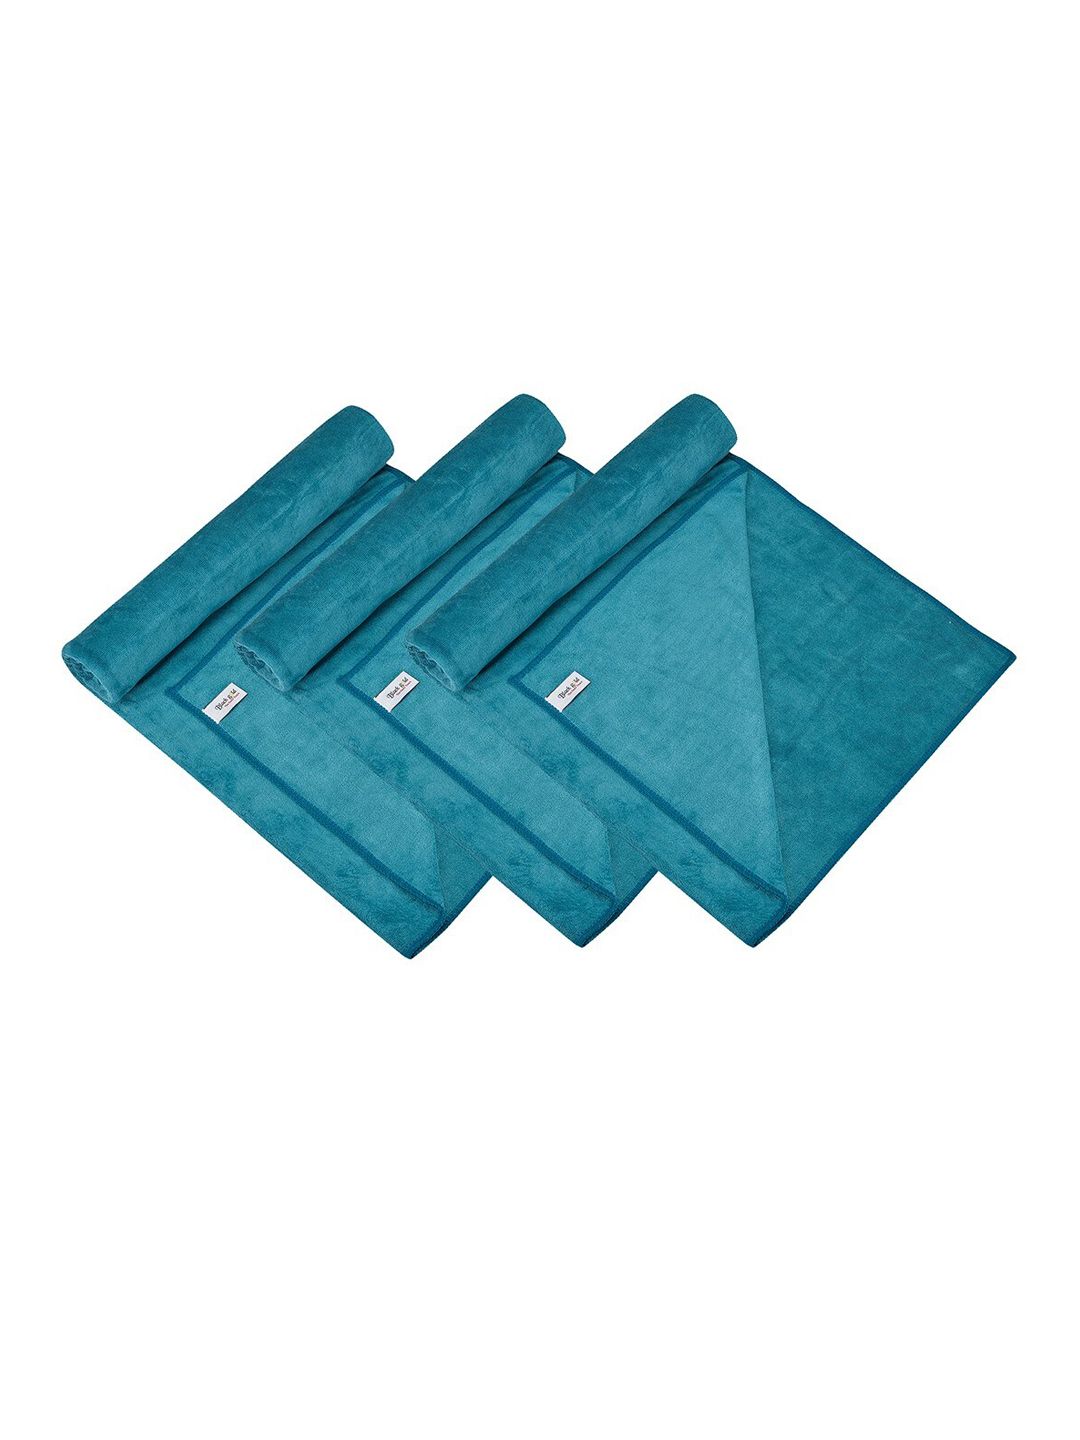 Black gold Set Of 3 Peacock Green Solid 400 GSM Bath Towels Price in India